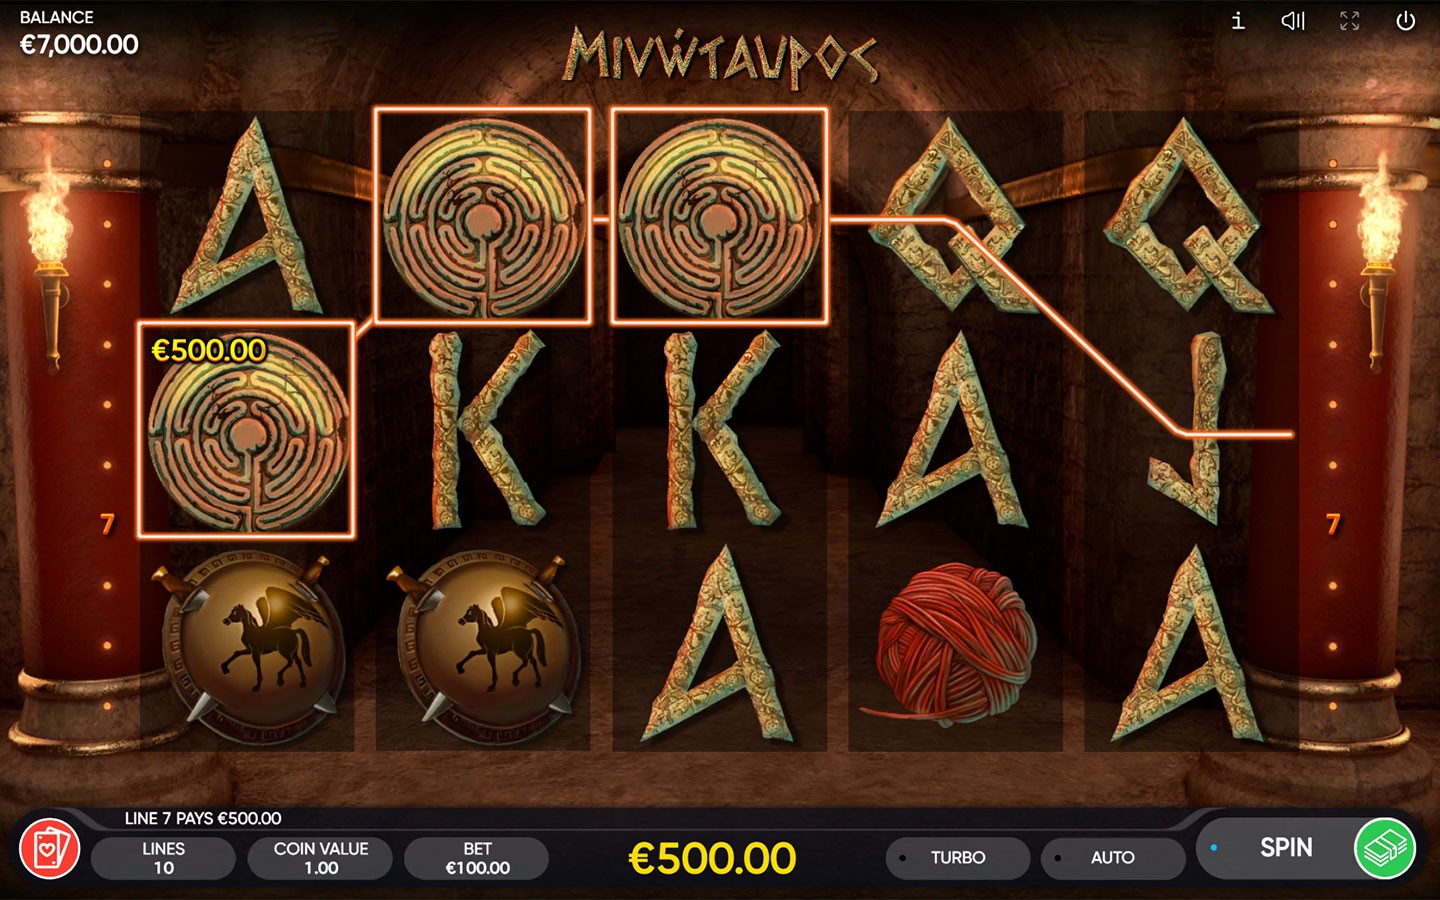 TOP 3D SLOTS OF 2021 | Try Minotauros game now!